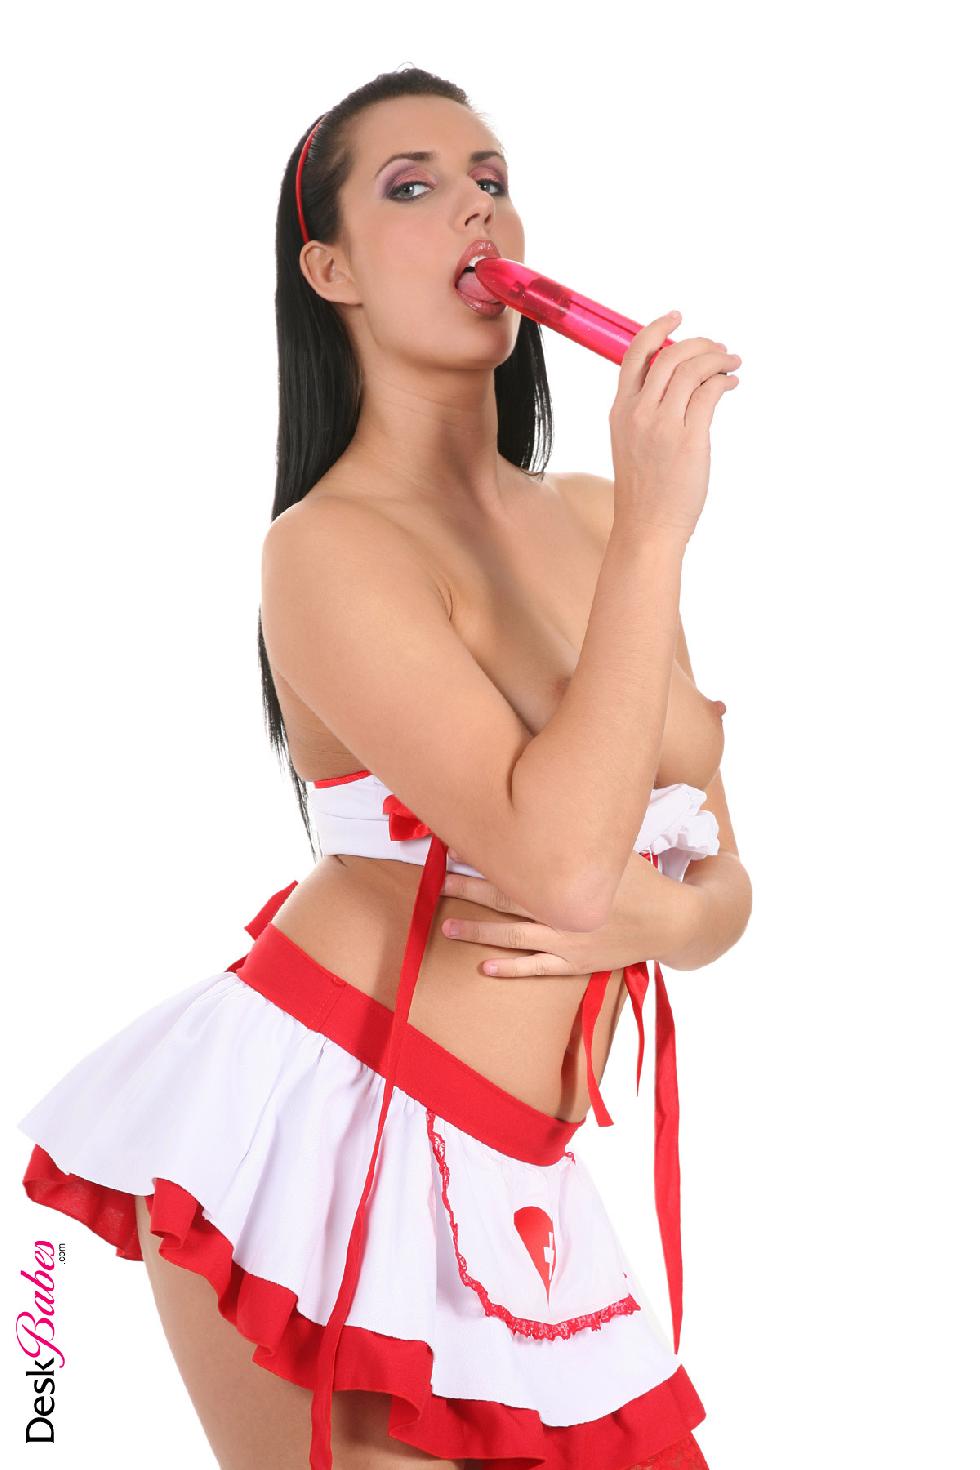 Very naughty nurse and her red tool - Melissa Ria - 4